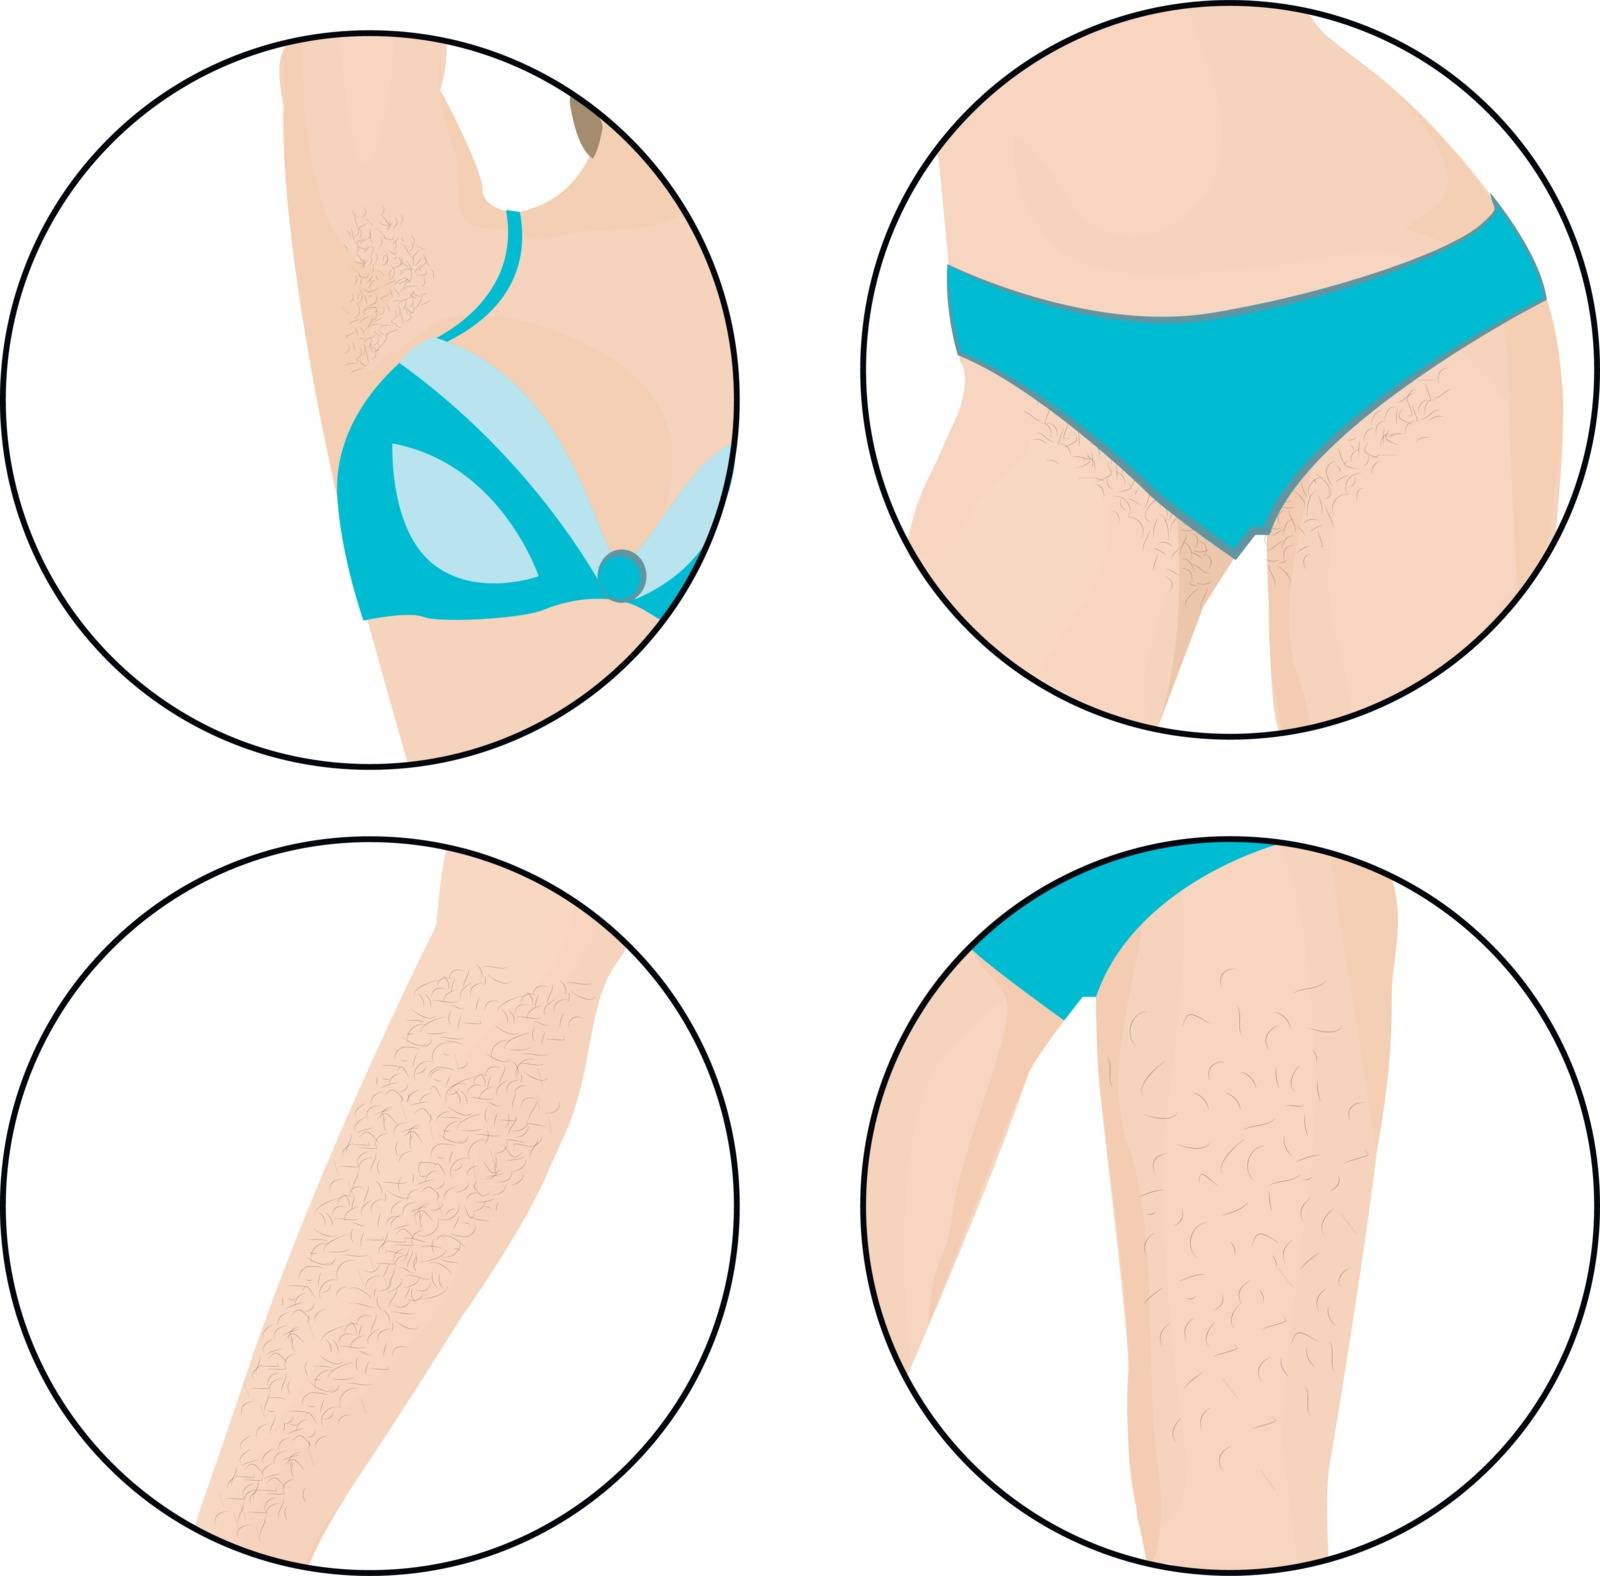 Hair removal zones  on a girl's body vector illustration by Olena758